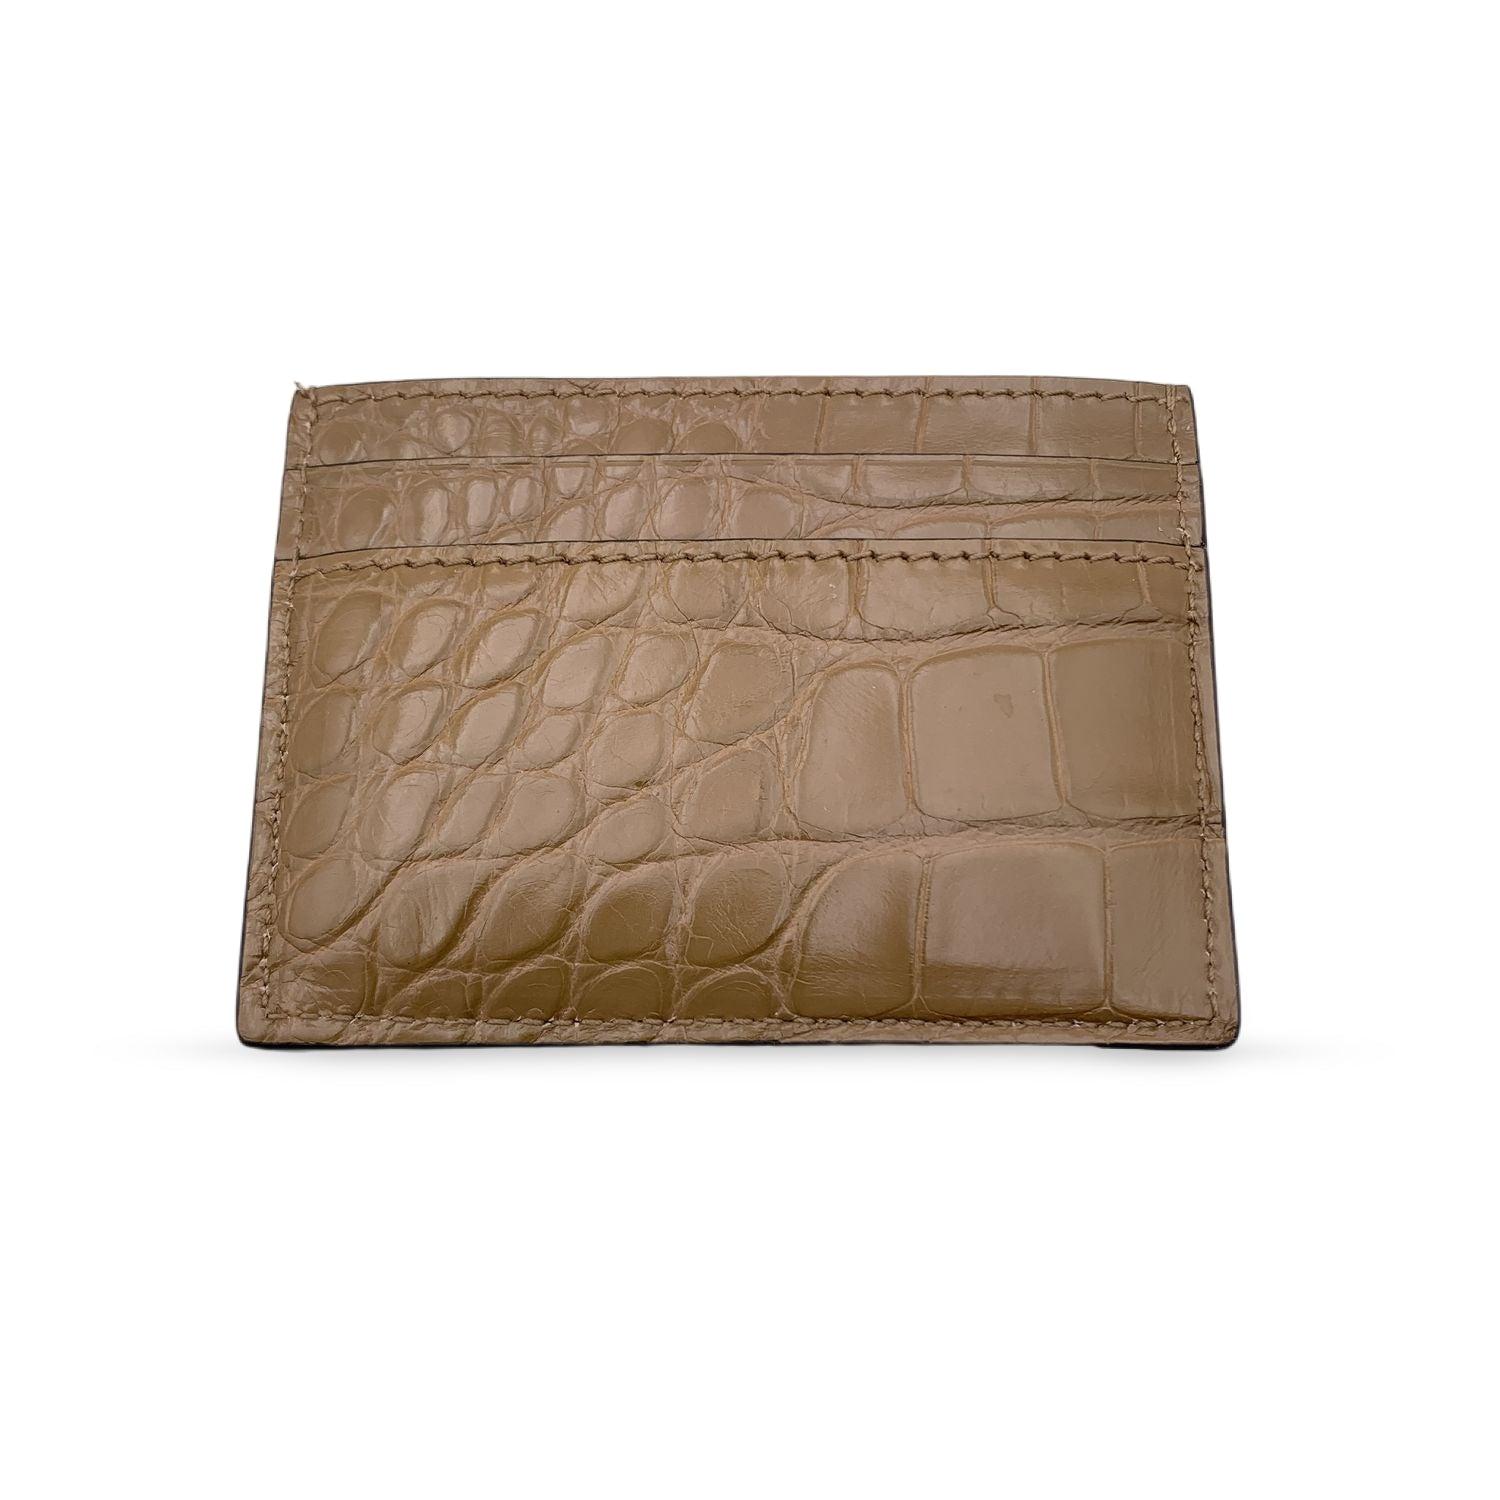 This beautiful Bag will come with a Certificate of Authenticity provided by Entrupy. The certificate will be provided at no further cost Beautiful Gucci 'Zumi' credit card holder wallet, crafted in tan/light brown embossed leather with gold and